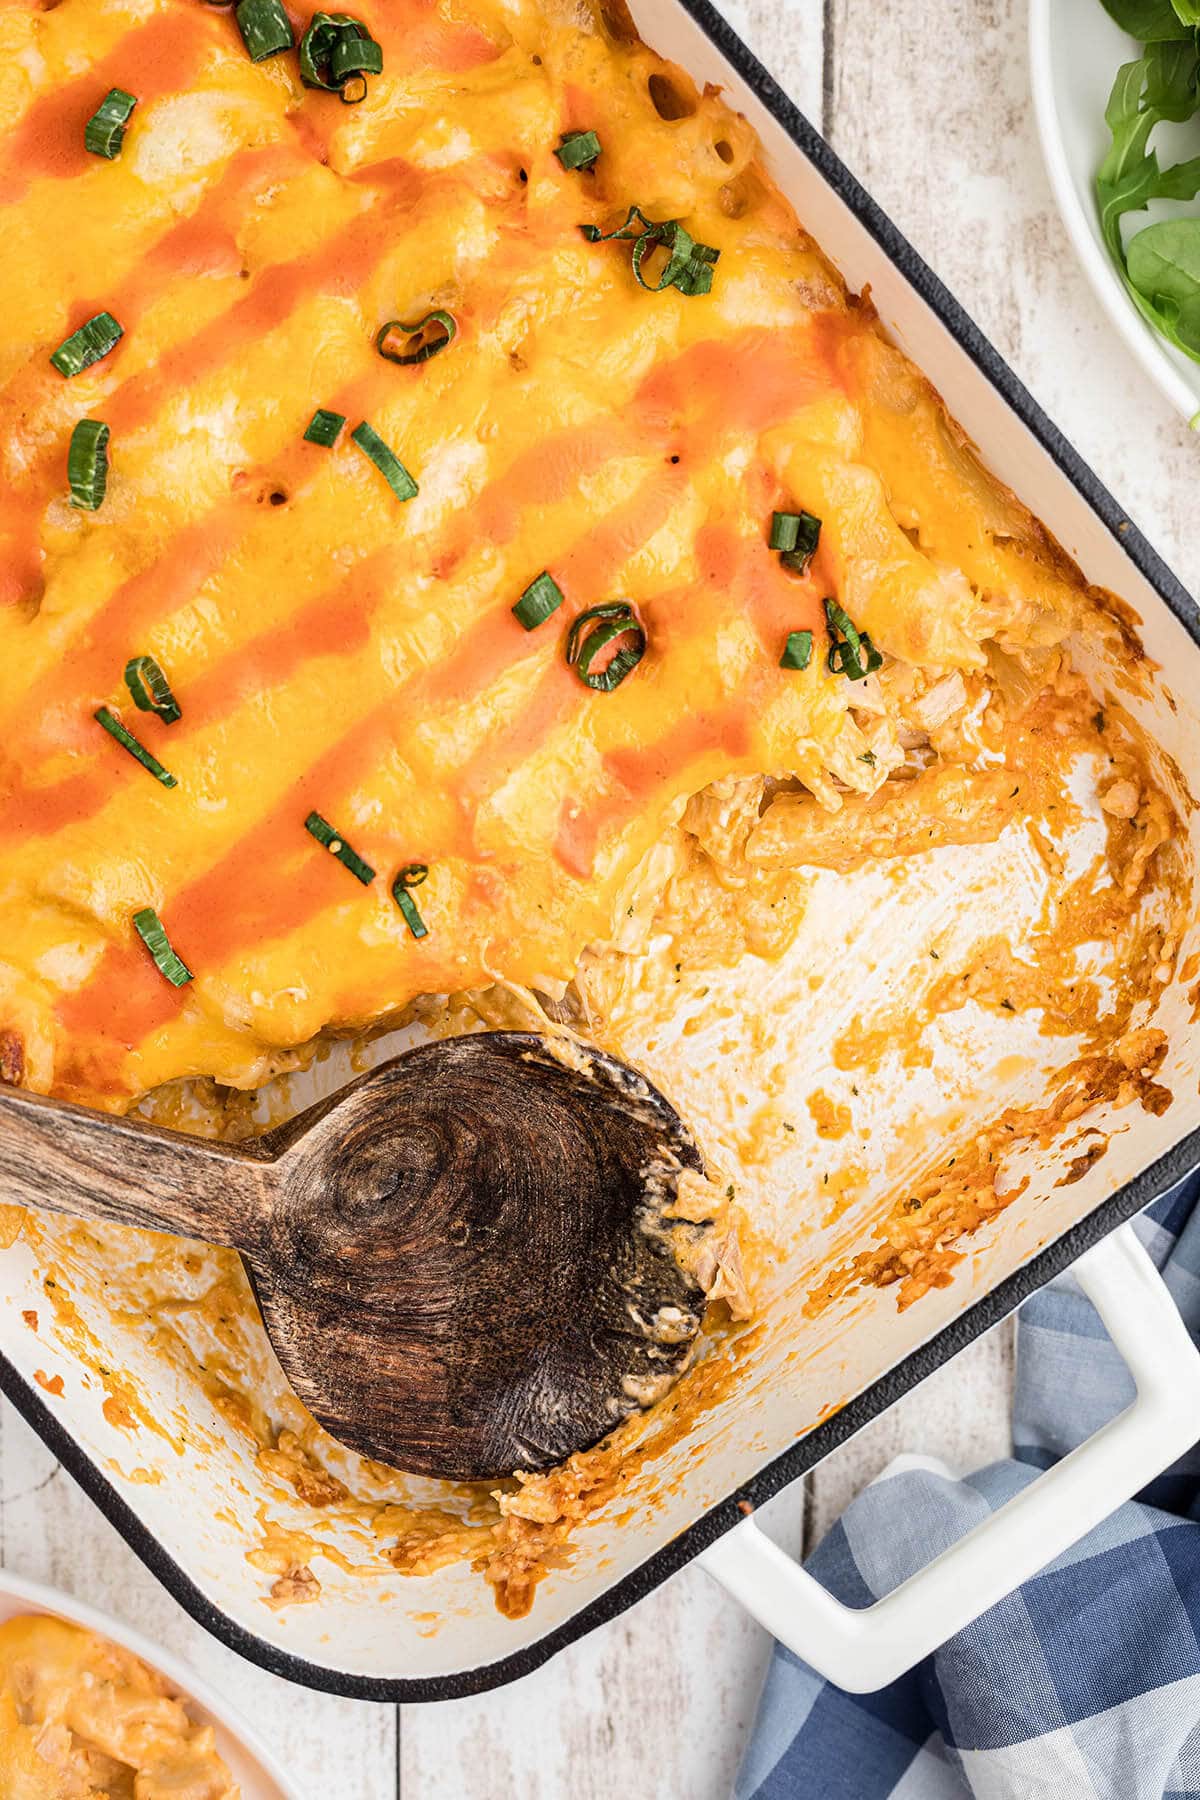 Buffalo Chicken Pasta Bake in casserole dish with serving spoon.